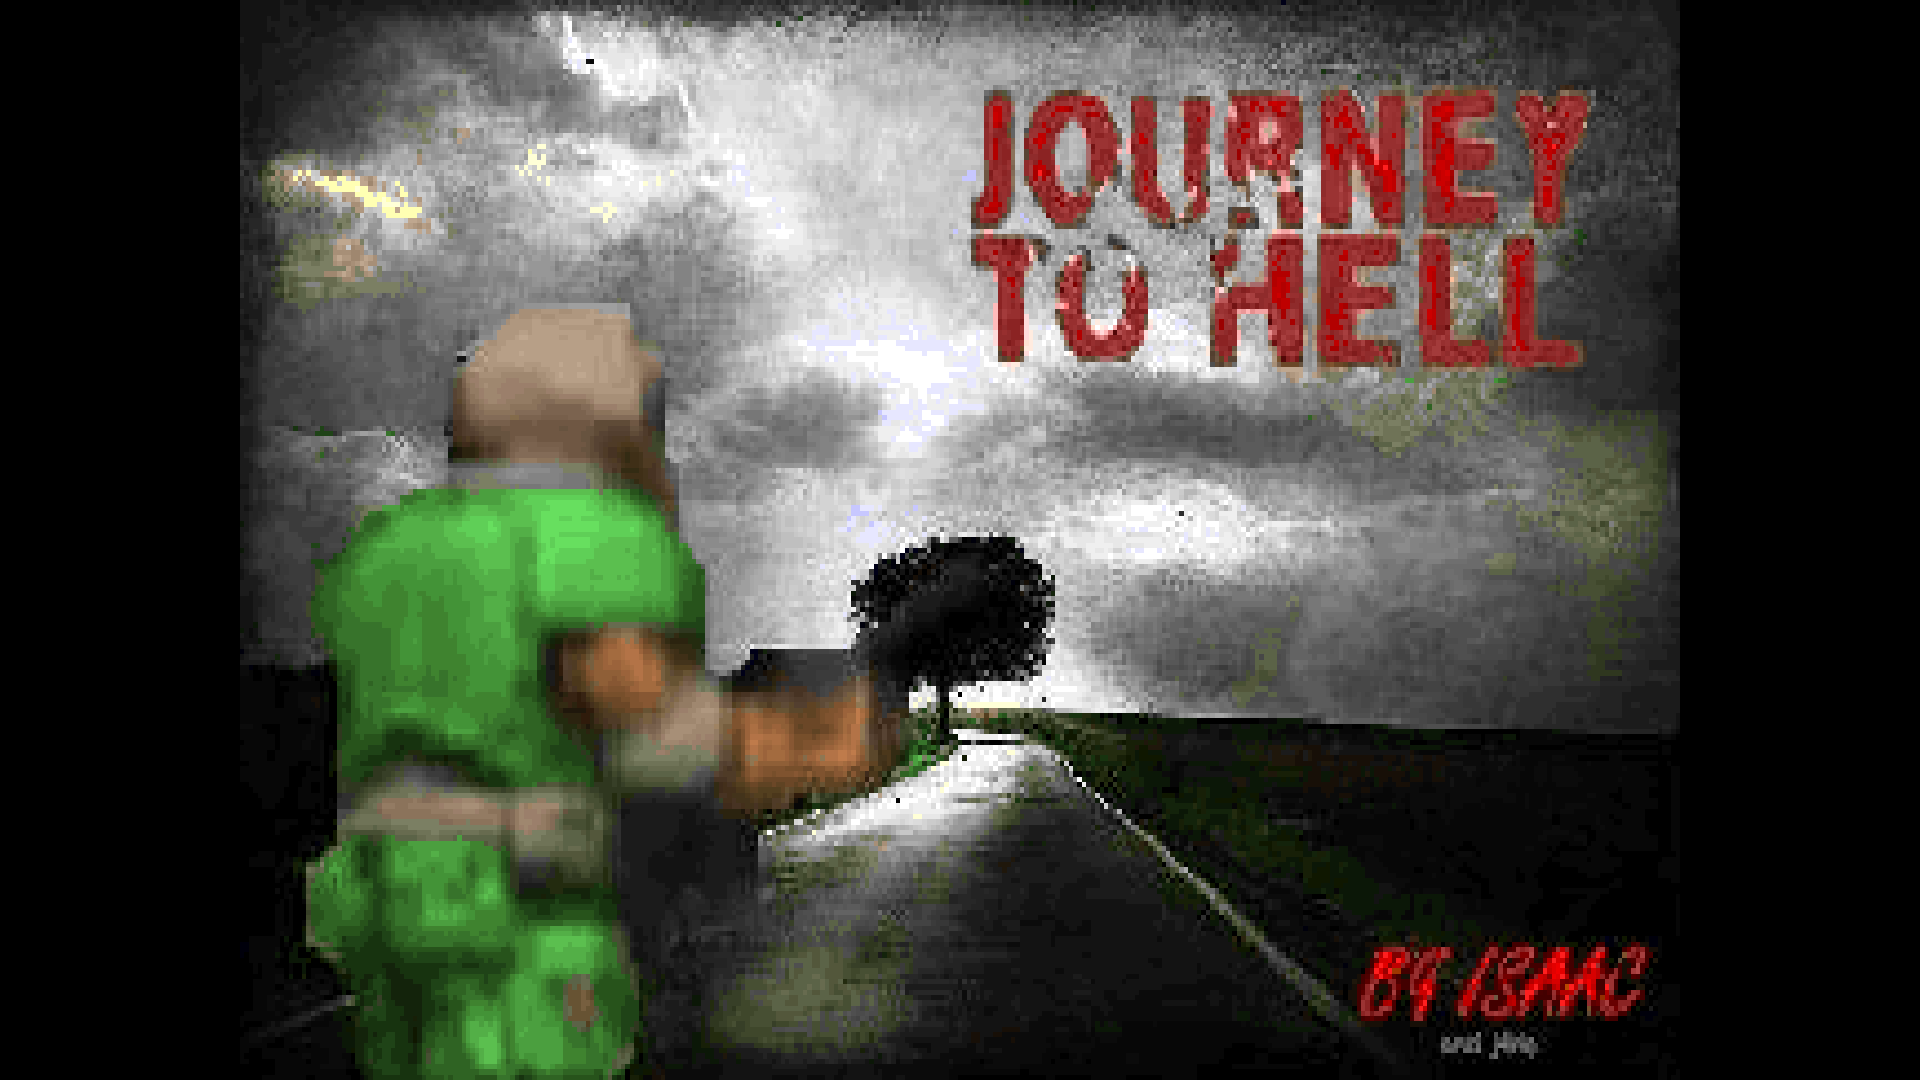 complex_journey_to_hell_2.0